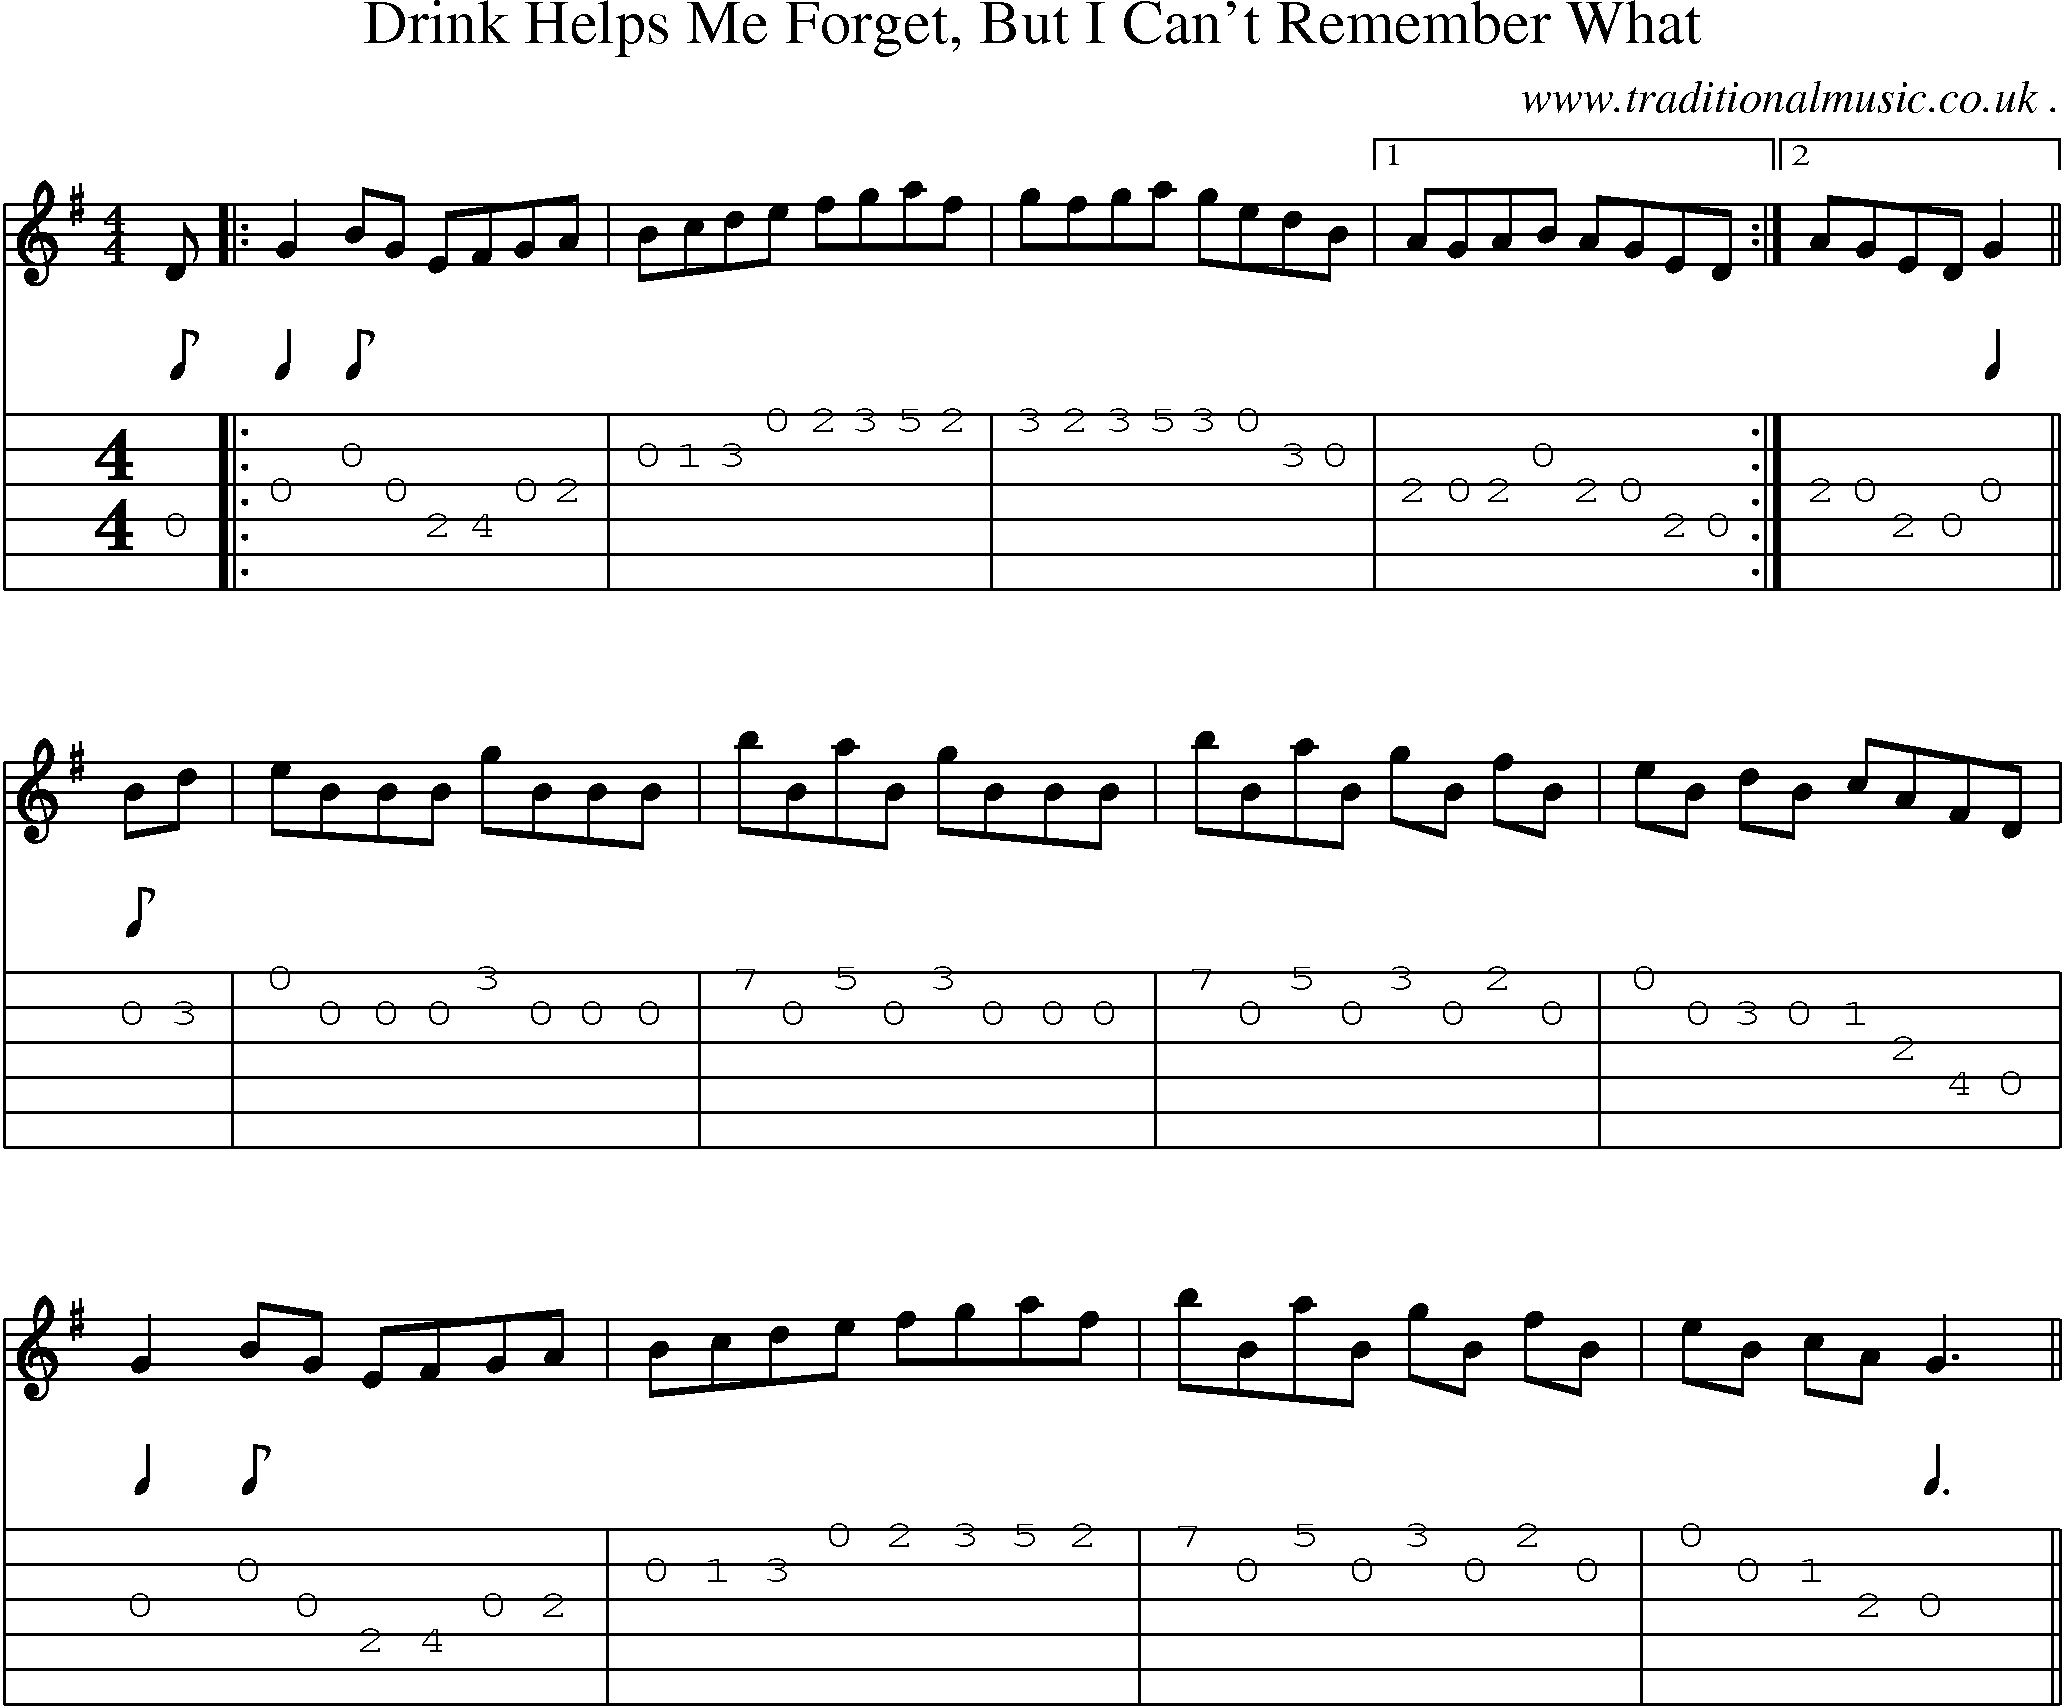 Sheet-music  score, Chords and Guitar Tabs for Drink Helps Me Forget But I Cant Remember What